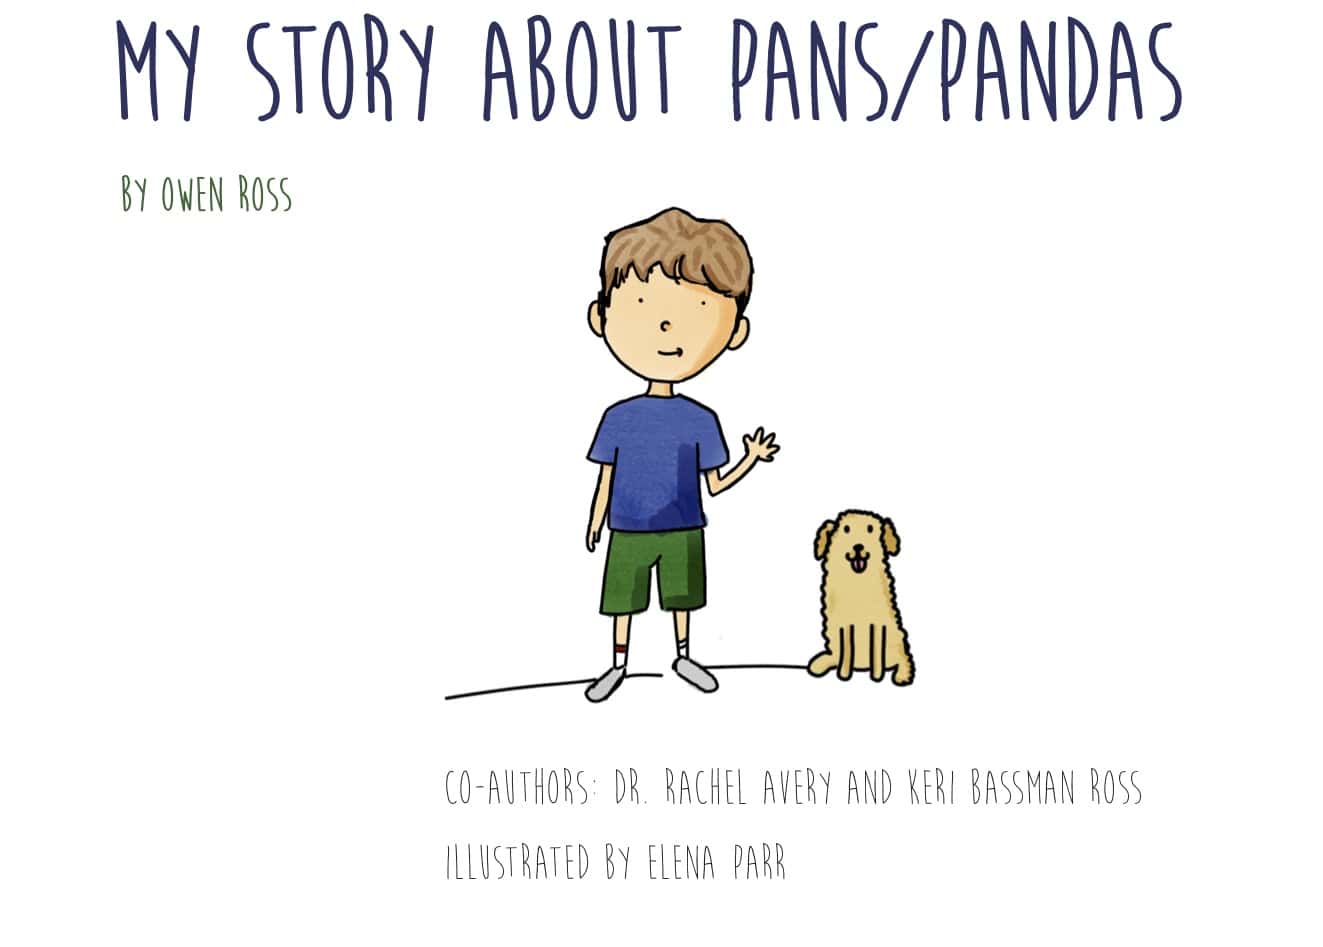 Cover of the book My Story About PANS/PANDAS, with a drawing of a child and their dog.